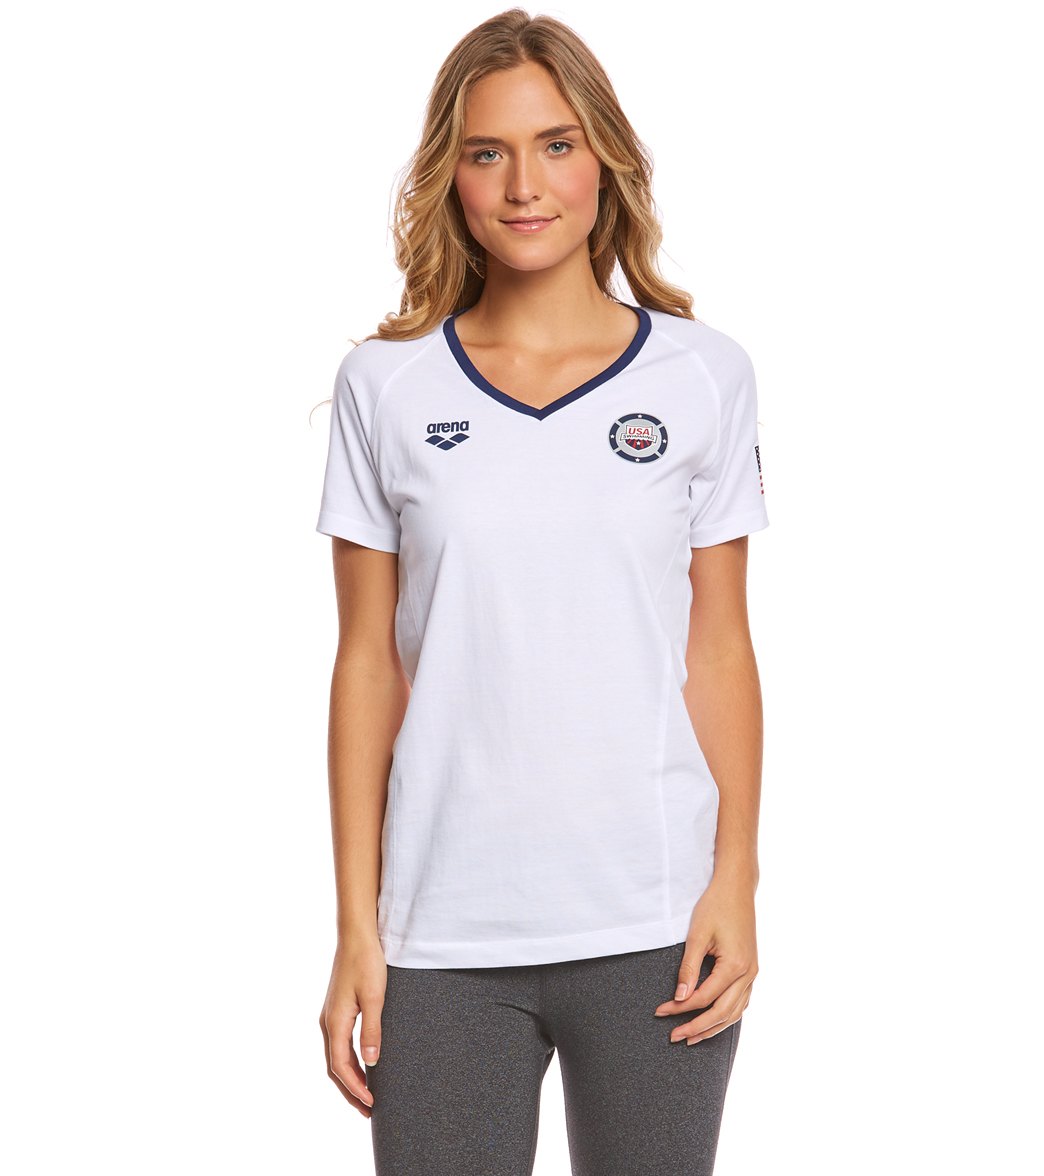 Arena Women's National Team Short Sleeve Tee Shirt - White/Navy Large Size Large Cotton - Swimoutlet.com